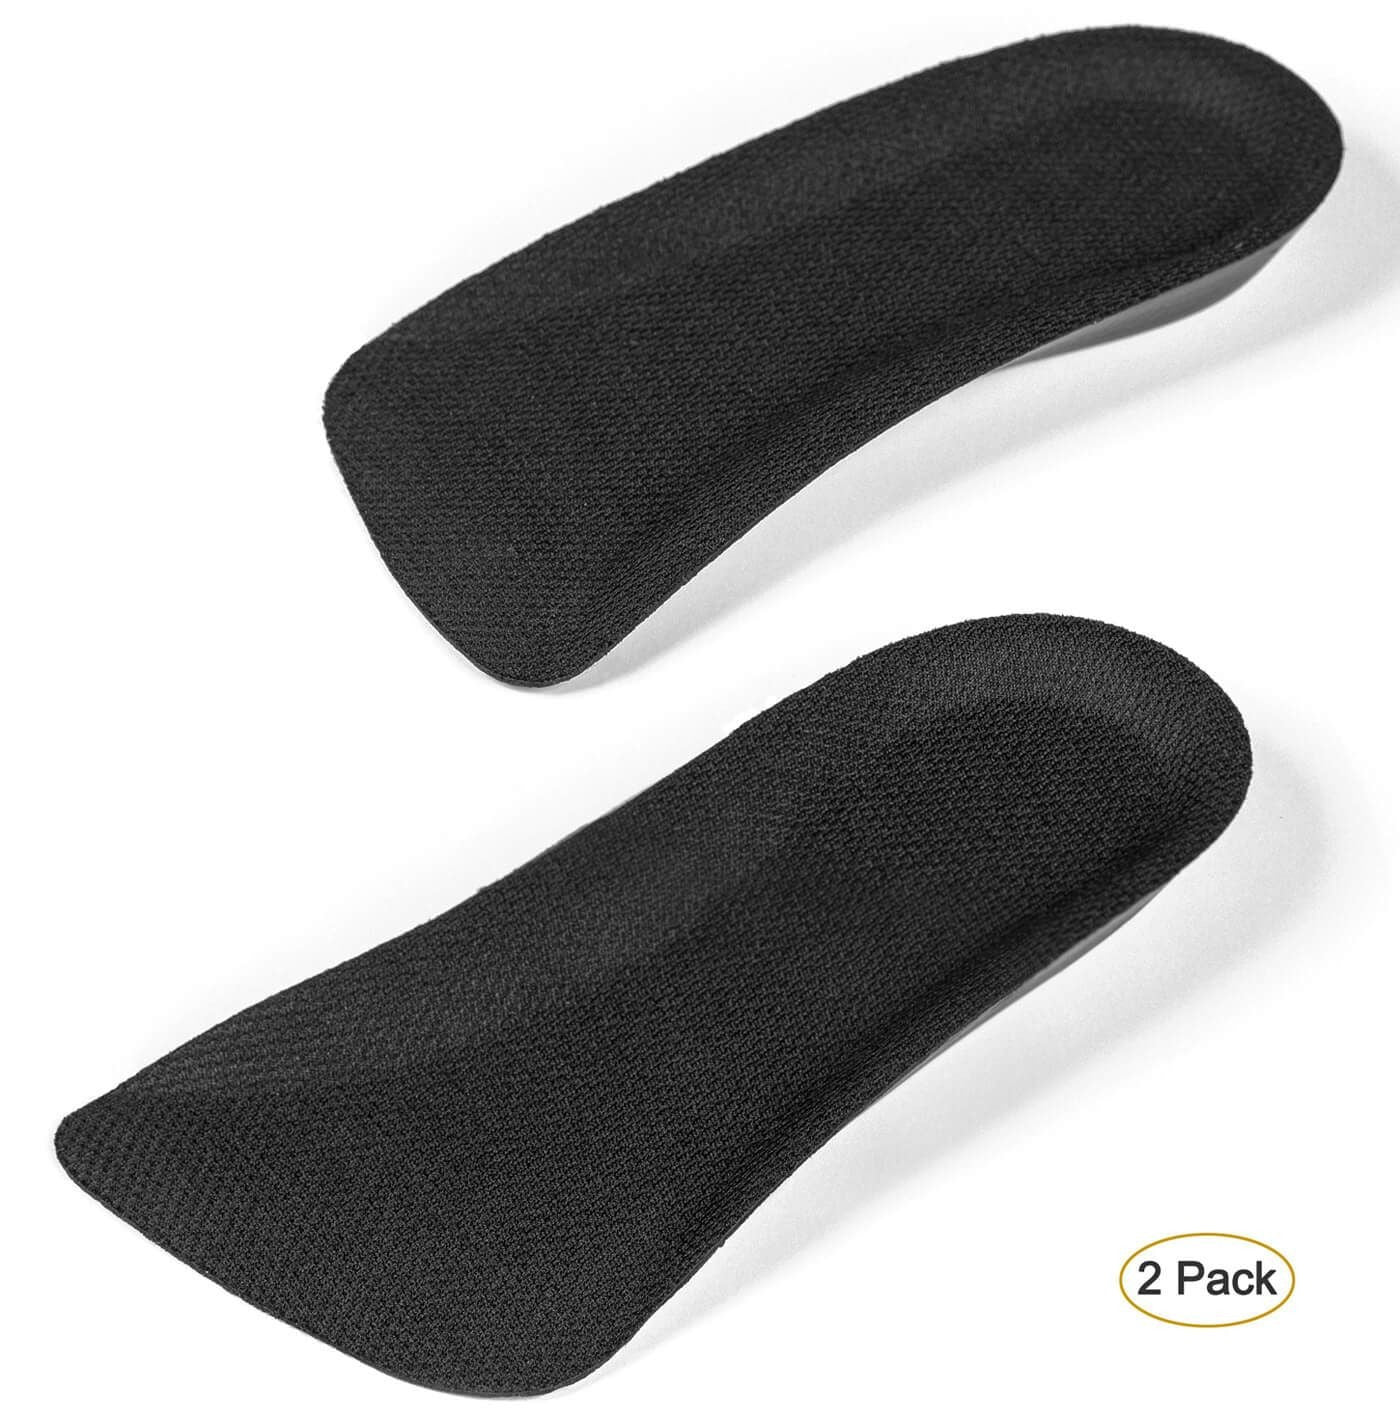 Height-Increasing Elevator Insert Half Insole Lifts - 0.5 Inch - CALTO